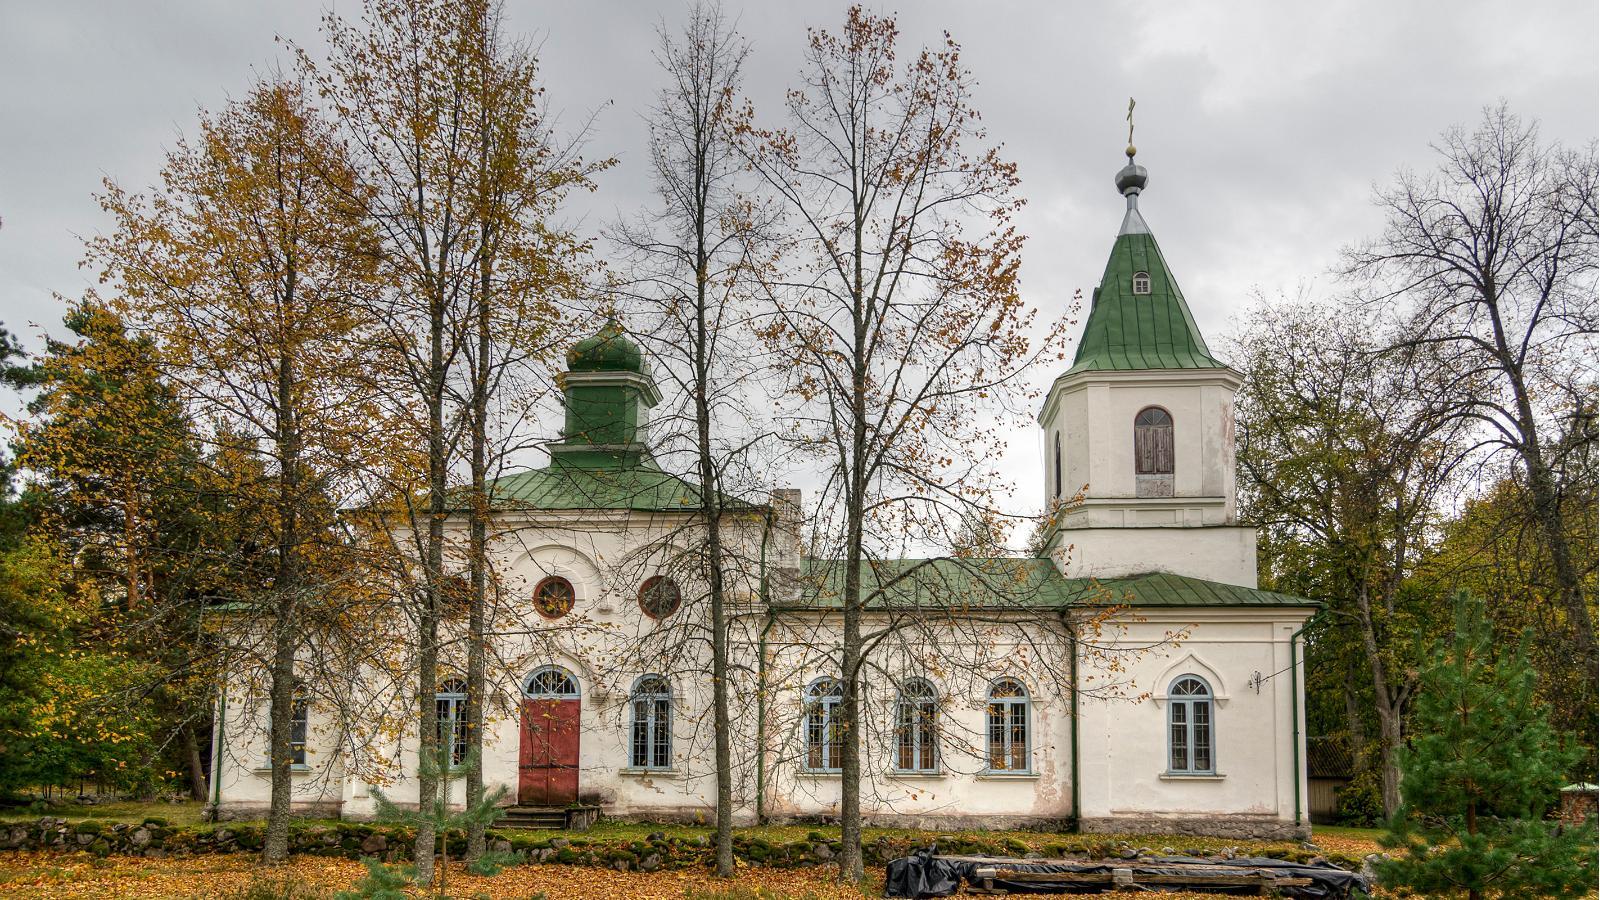 Apostolic Orthodox Church of the Transfiguration of Our Lord at Häädemeeste